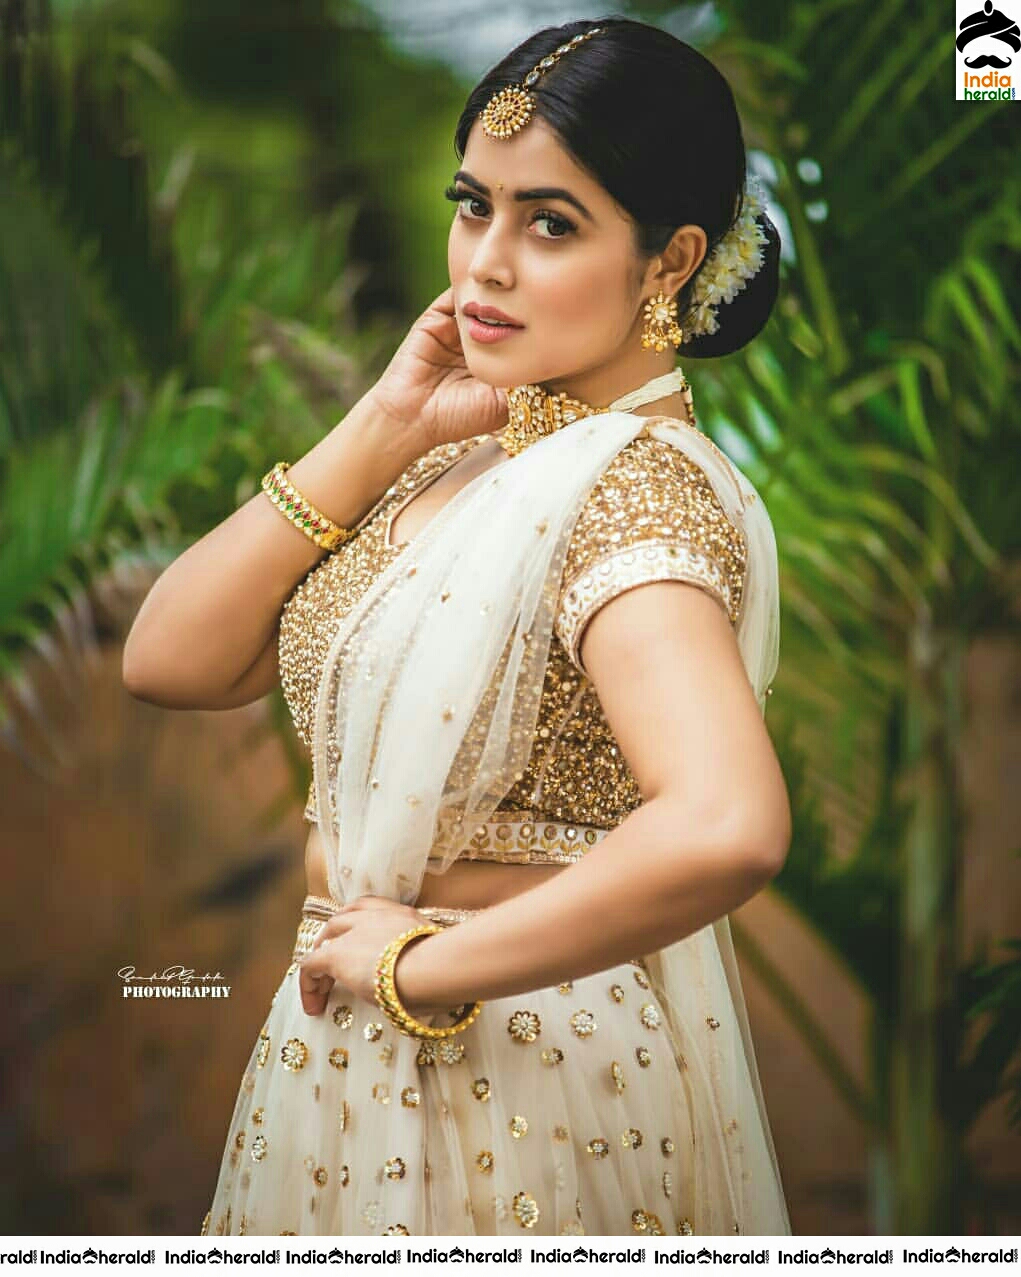 Poorna Looking Cute And Hot In These Photos